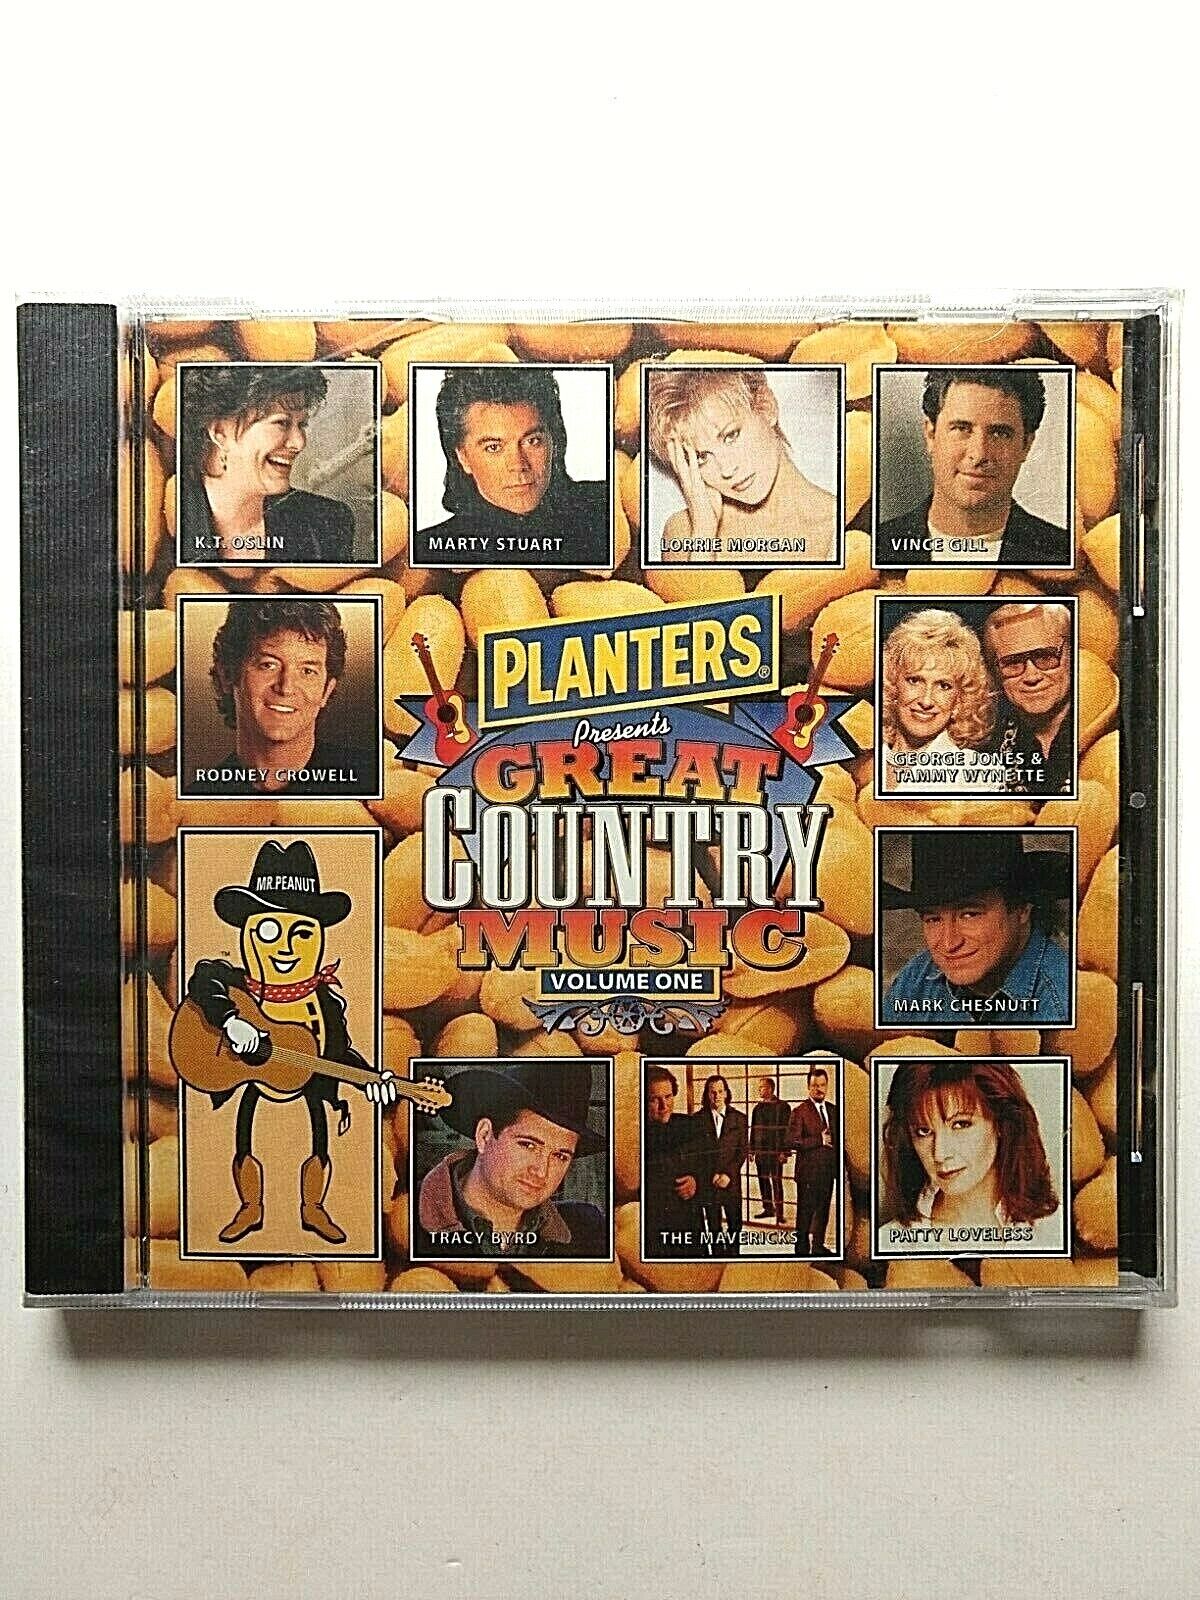 Rare: GREAT COUNTRY MUSIC by PLANTERS PEANUTS PRESENTS  Volume 1 CD New Sealed